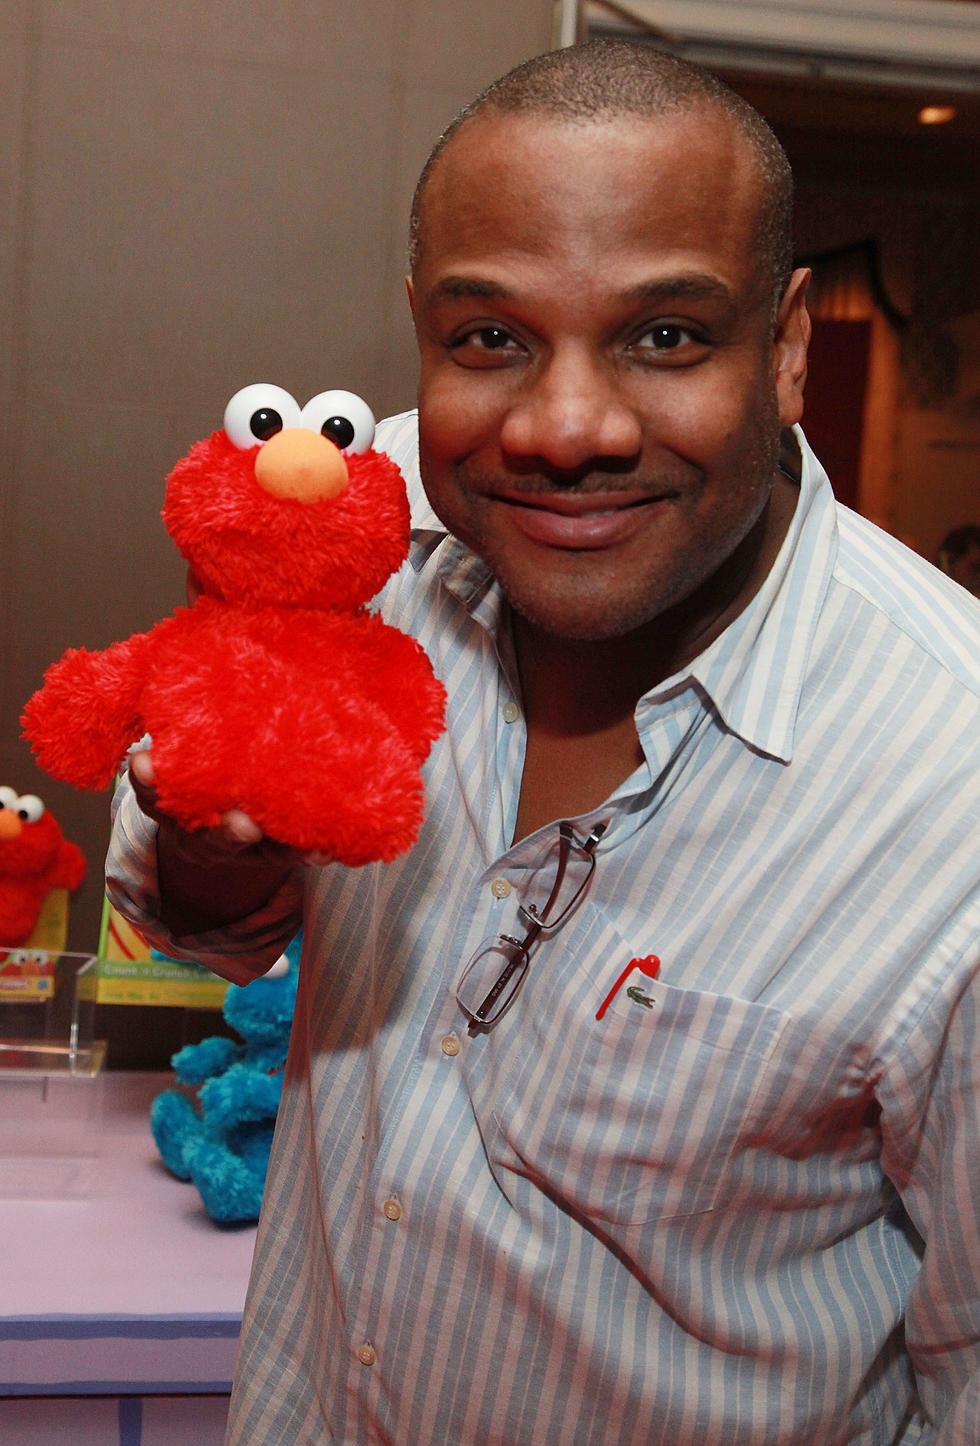 ‘Being Elmo: A Puppeteer’s Journey’ An Inspirational Documentary [VIDEO]